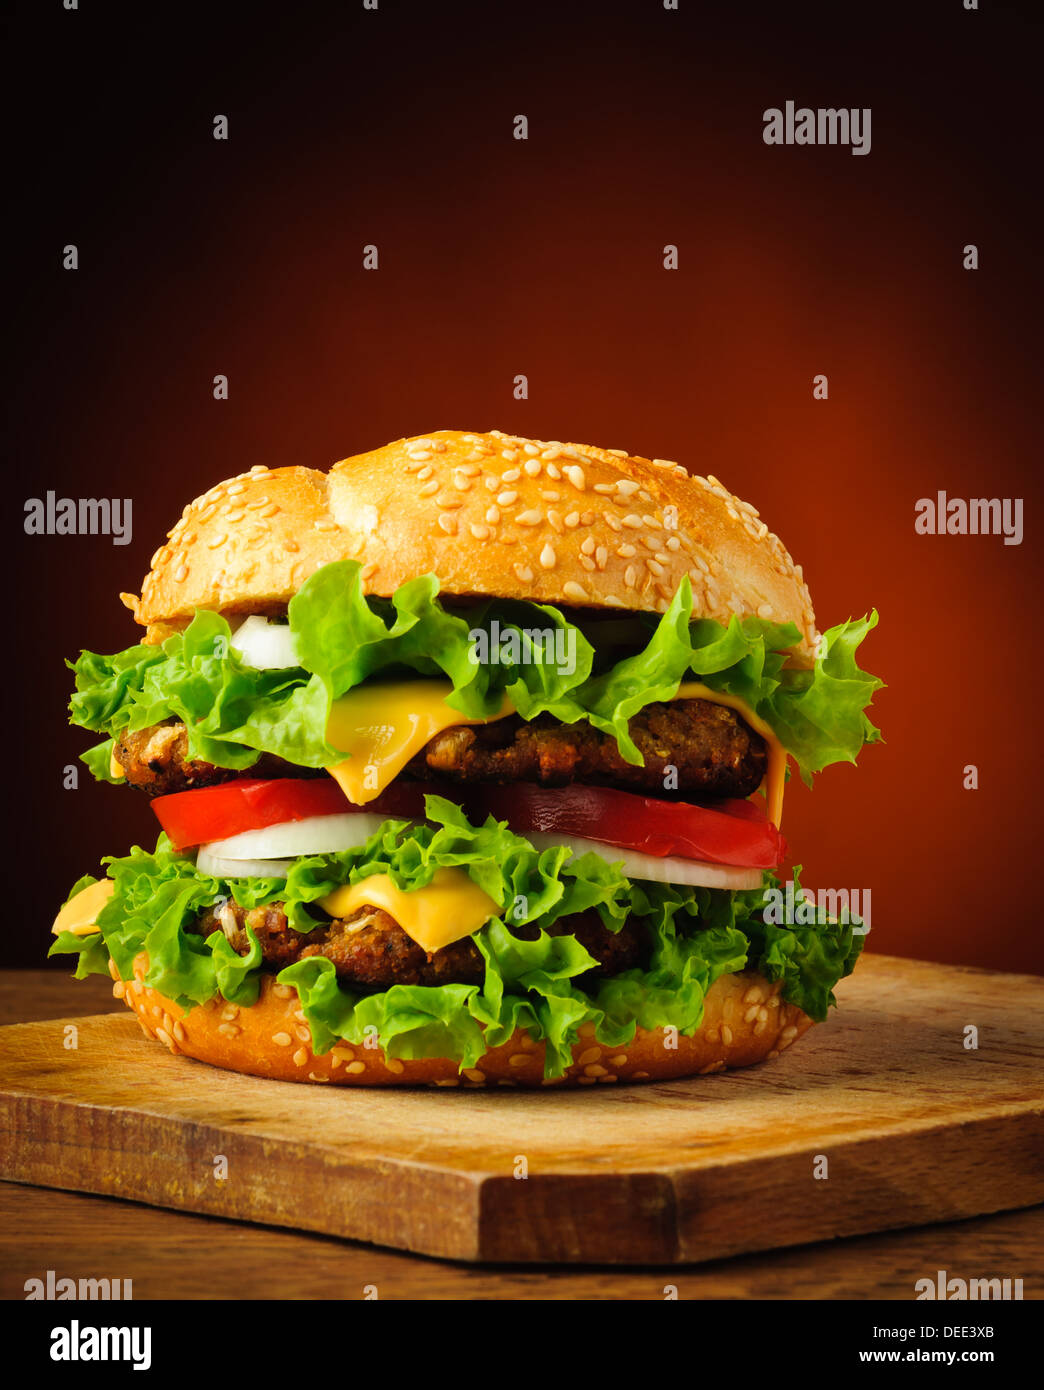 traditional homemade tasty hamburger or cheeseburger on a wooden plate Stock Photo